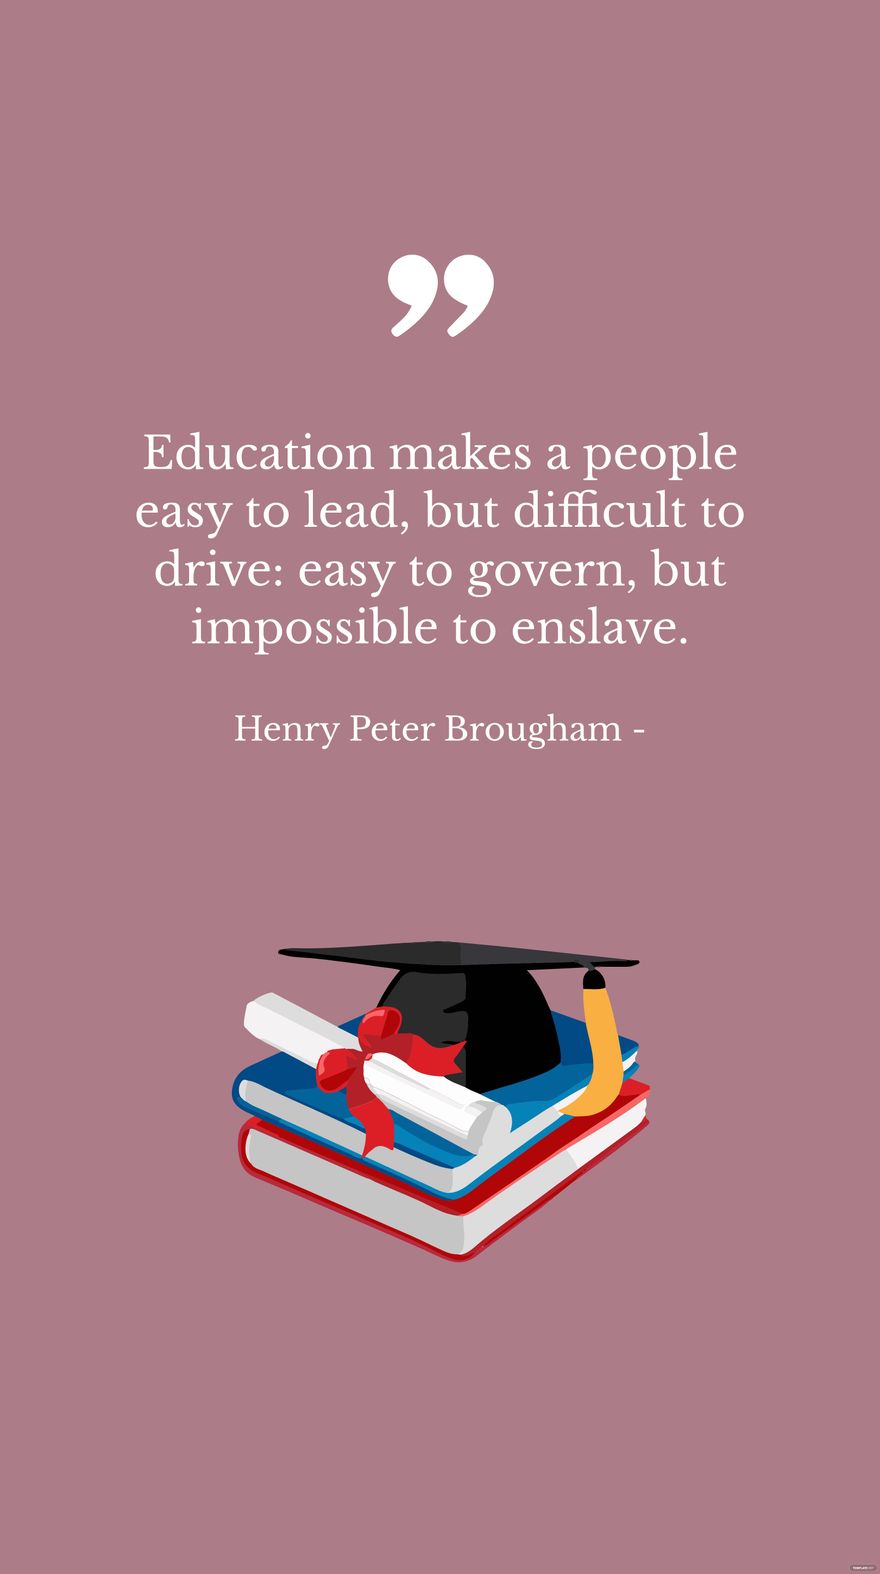 Henry Peter Brougham - Education makes a people easy to lead, but difficult to drive: easy to govern, but impossible to enslave.